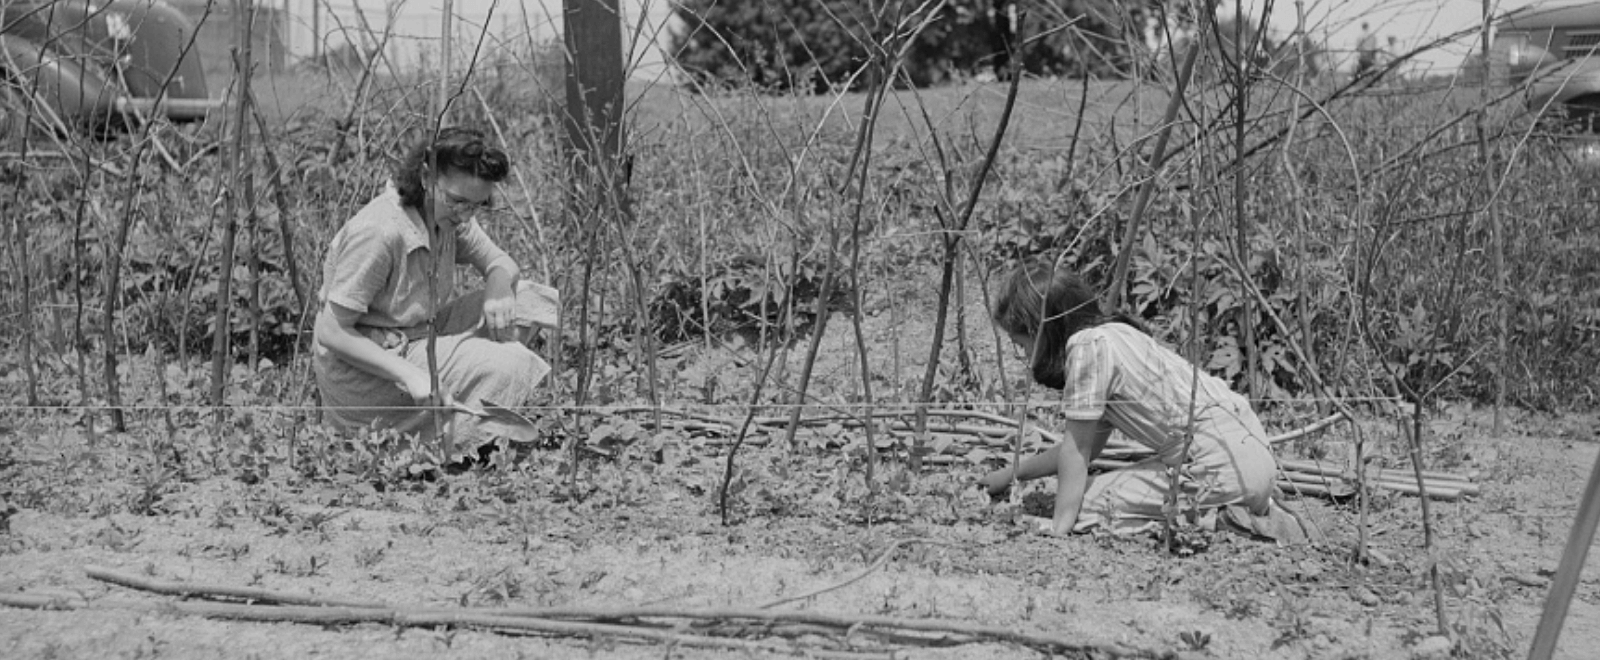 Women and a young girl doing gardening activities